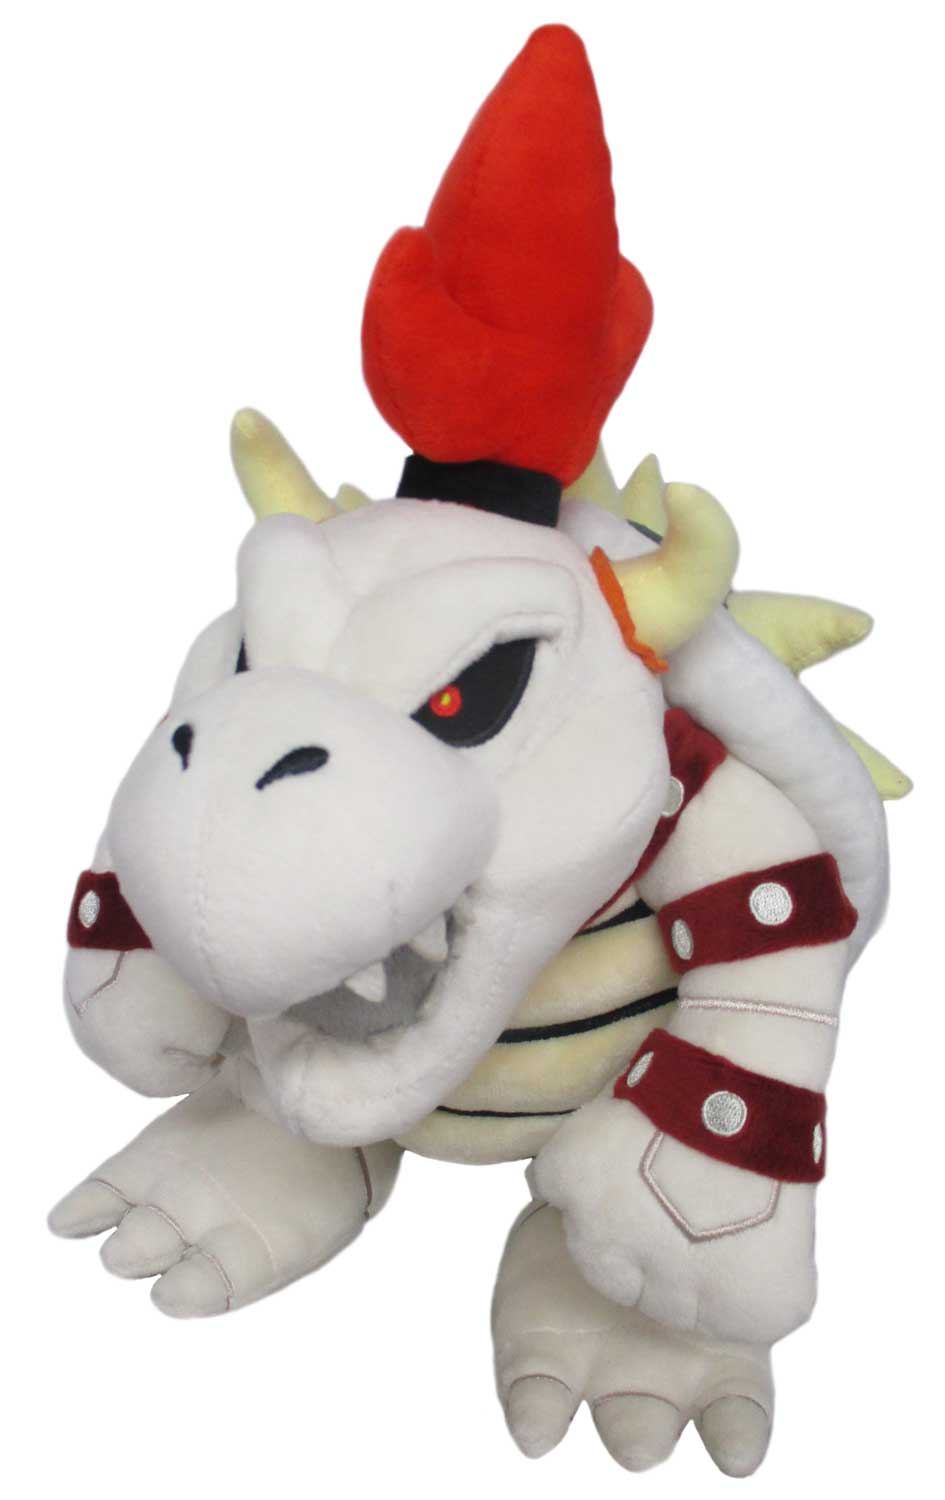 photos.Here is Dry Bowser plushie added to... super, mario, all, star, coll...